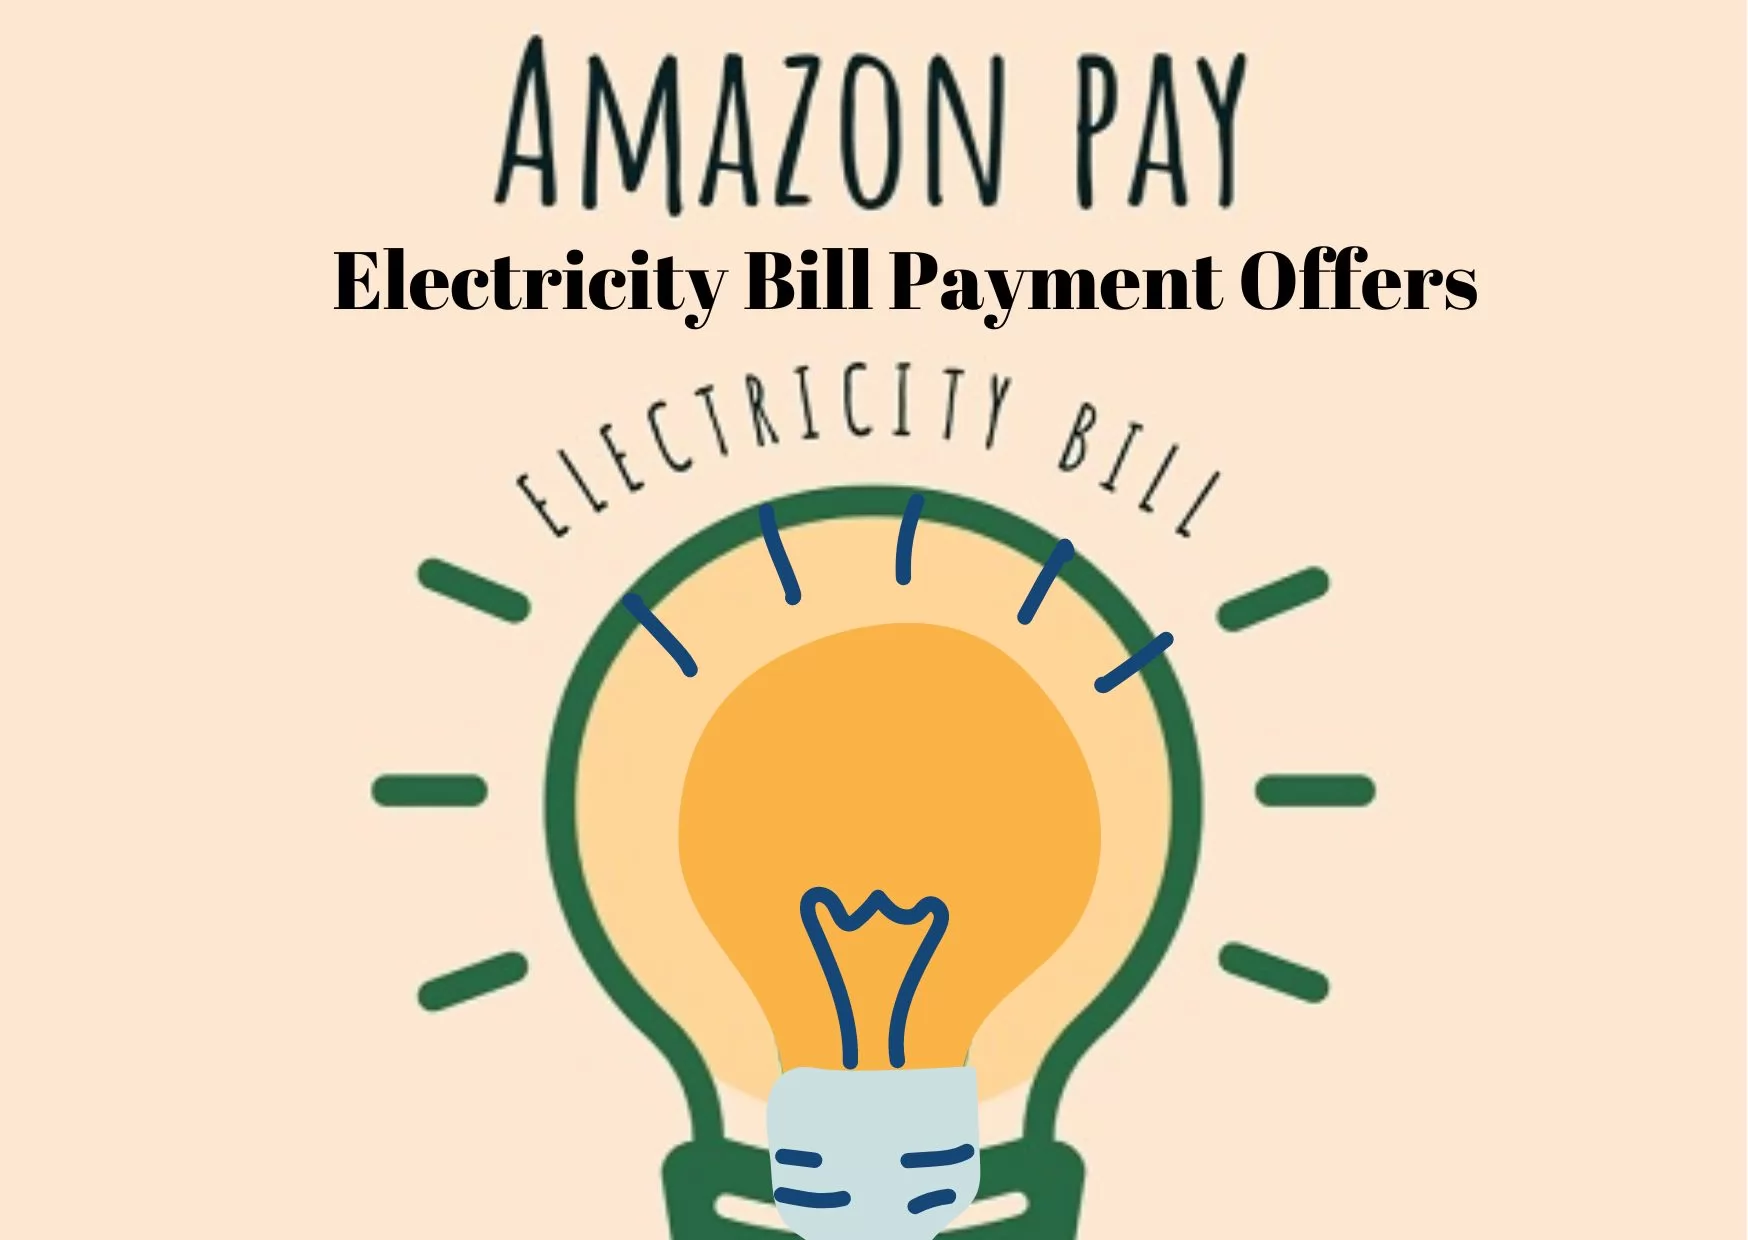 Amazon Pay Electricity Bill Payment Offers